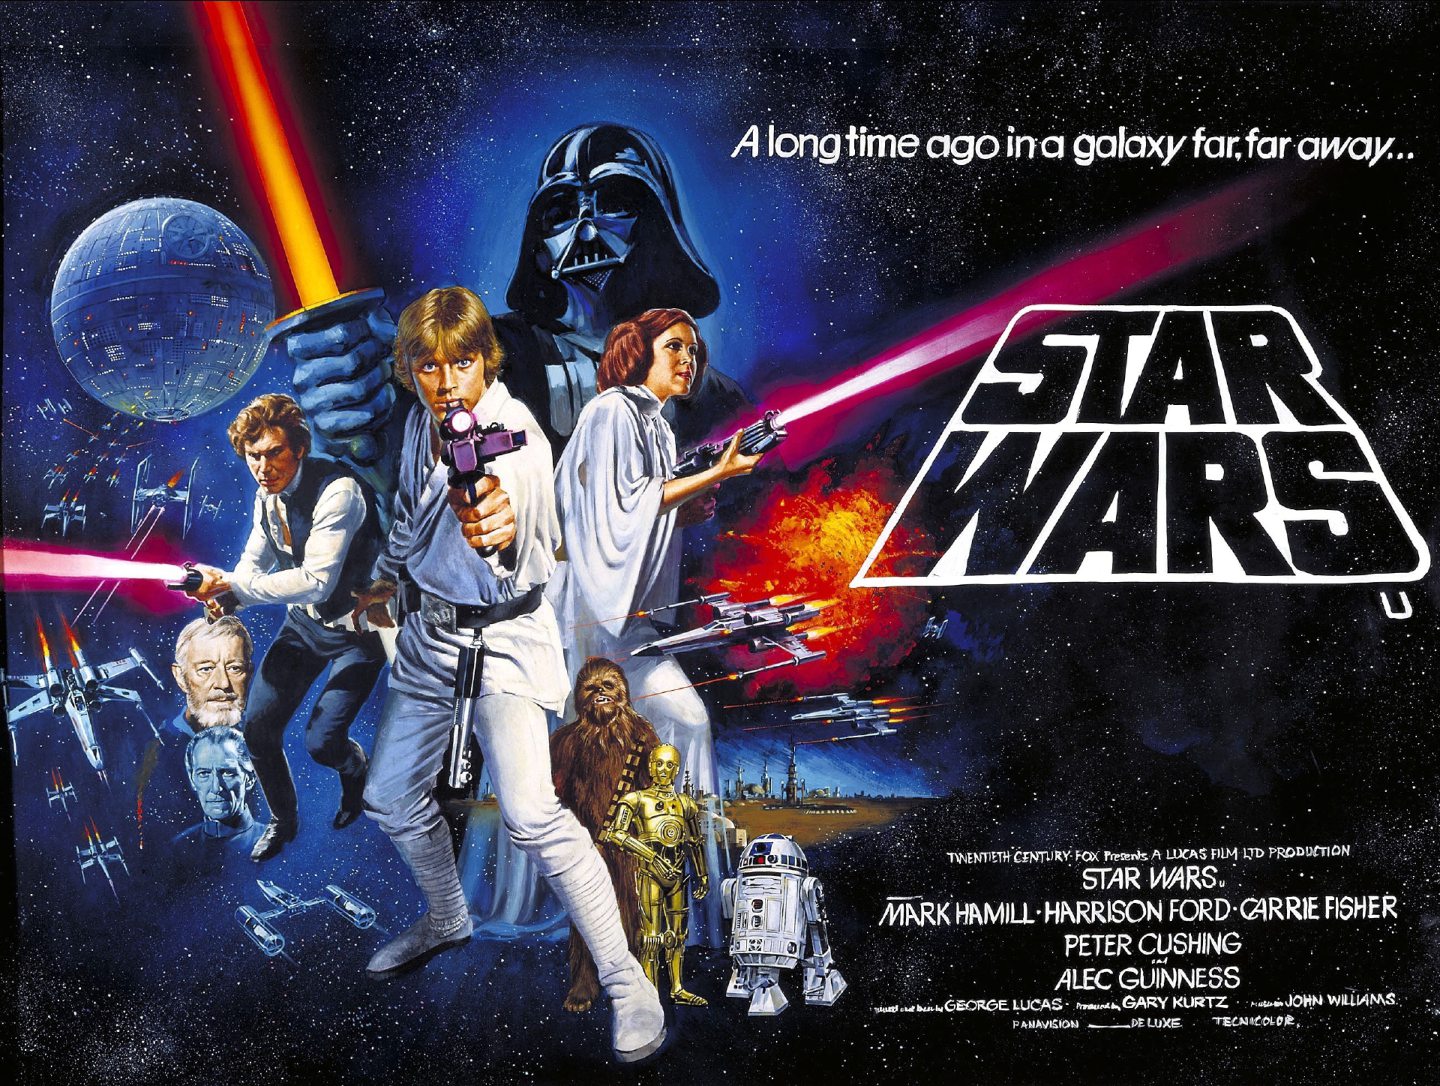 The poster for the first Star Wars film, A New Hope